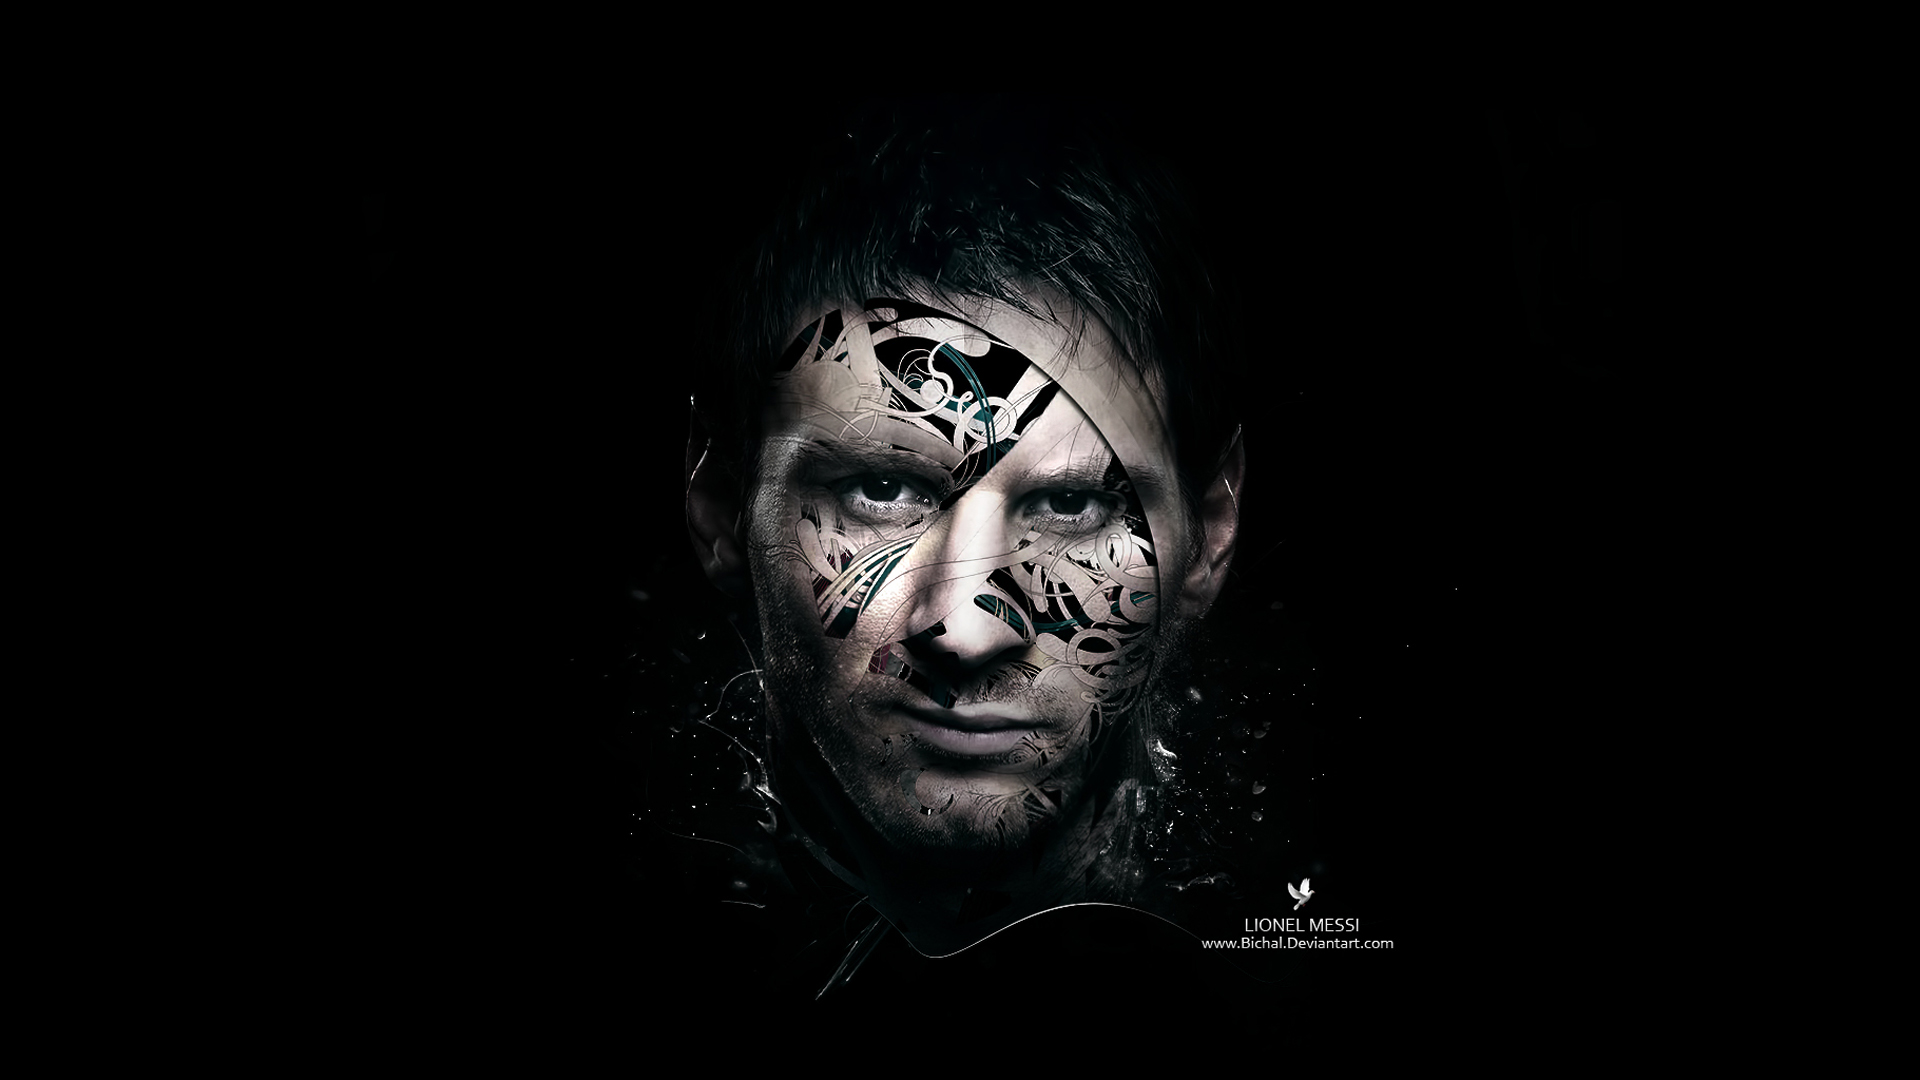 Lionel Messi Background Wallpaper High Definition Quality